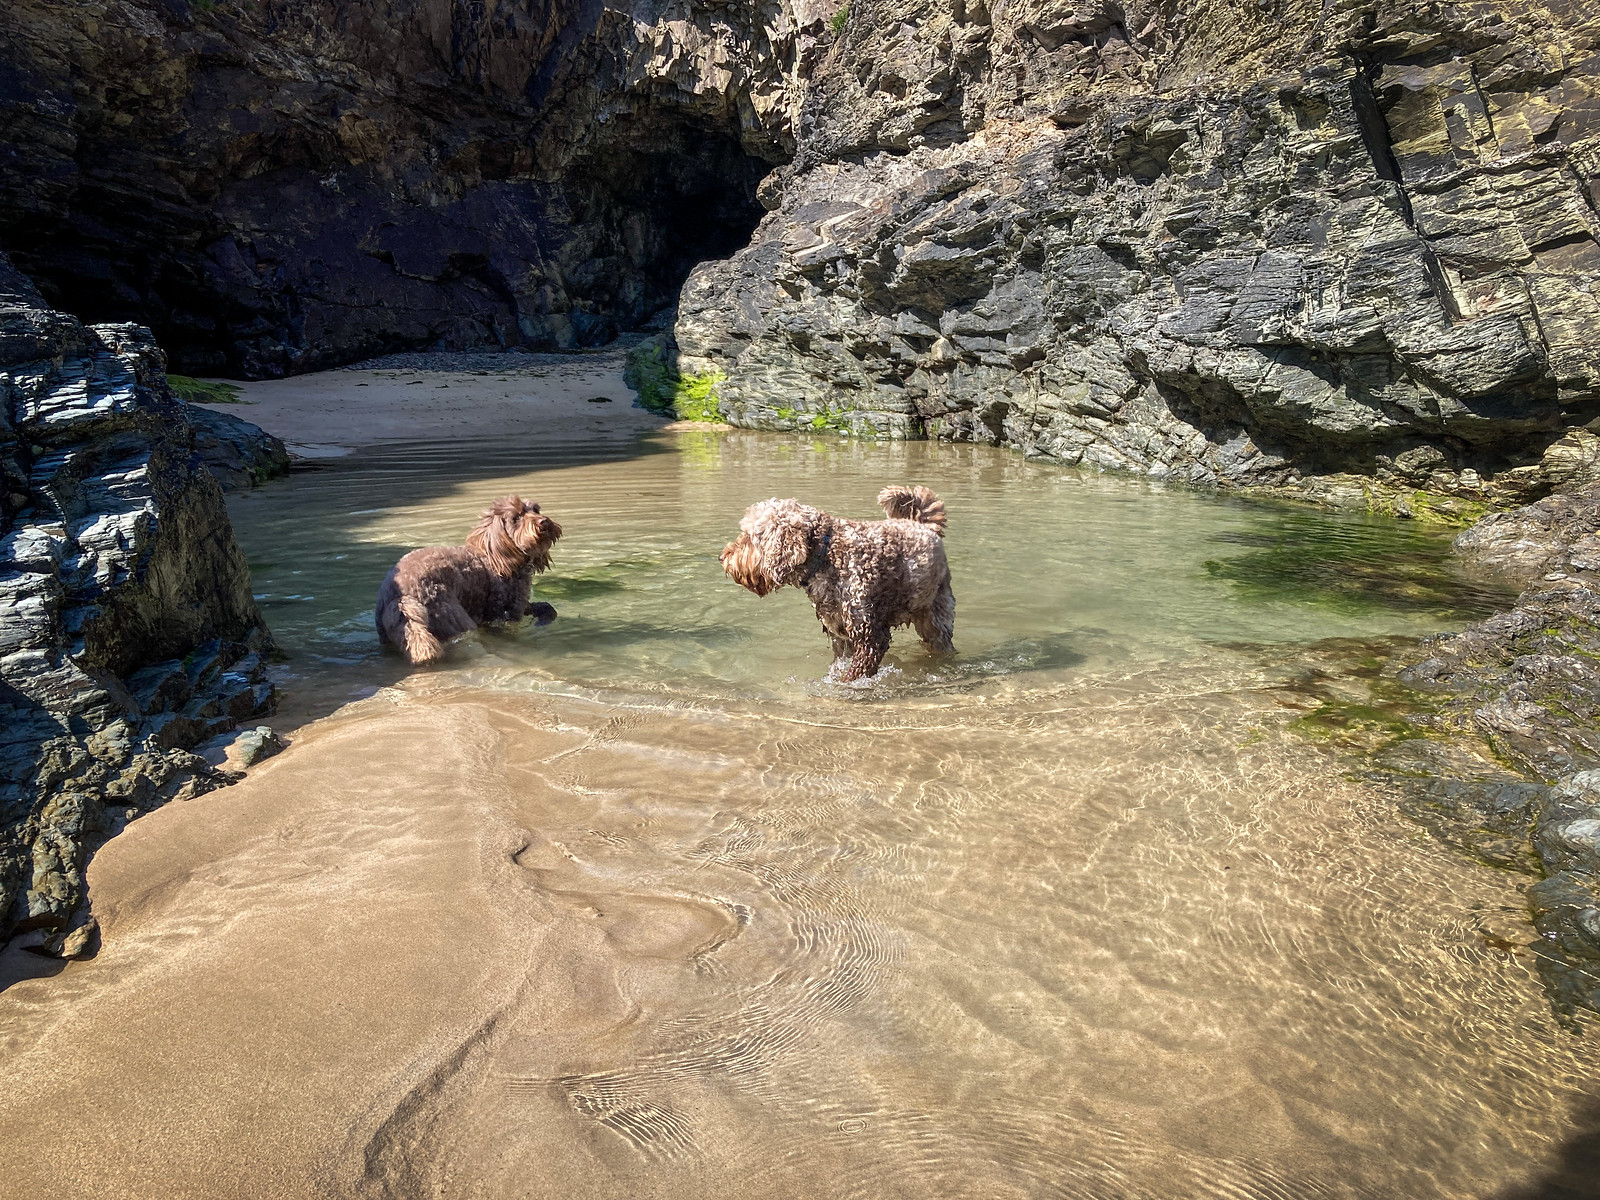 We found a swimming hole